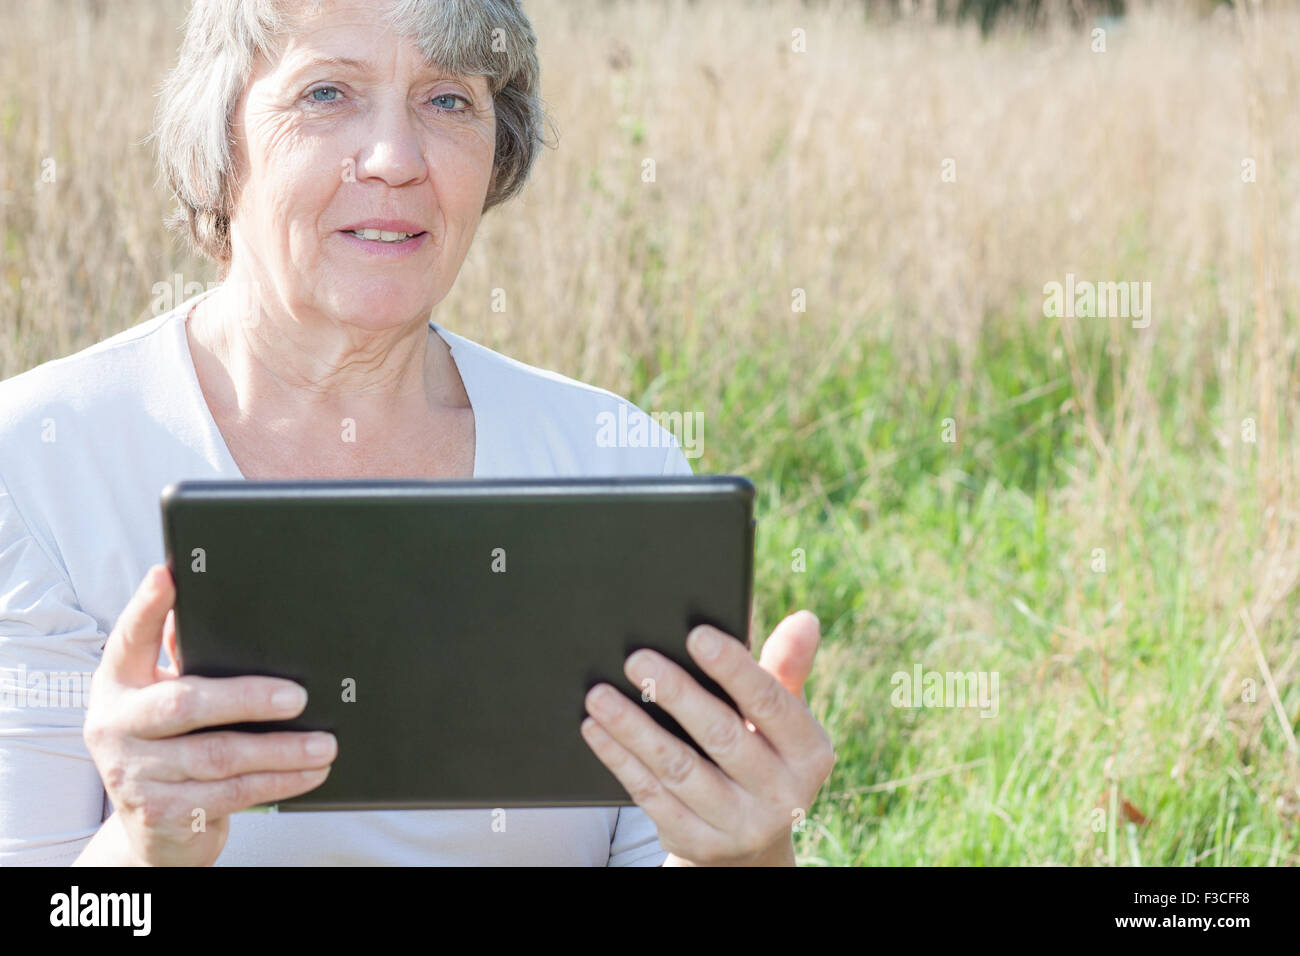 Senior woman using tablet device Banque D'Images